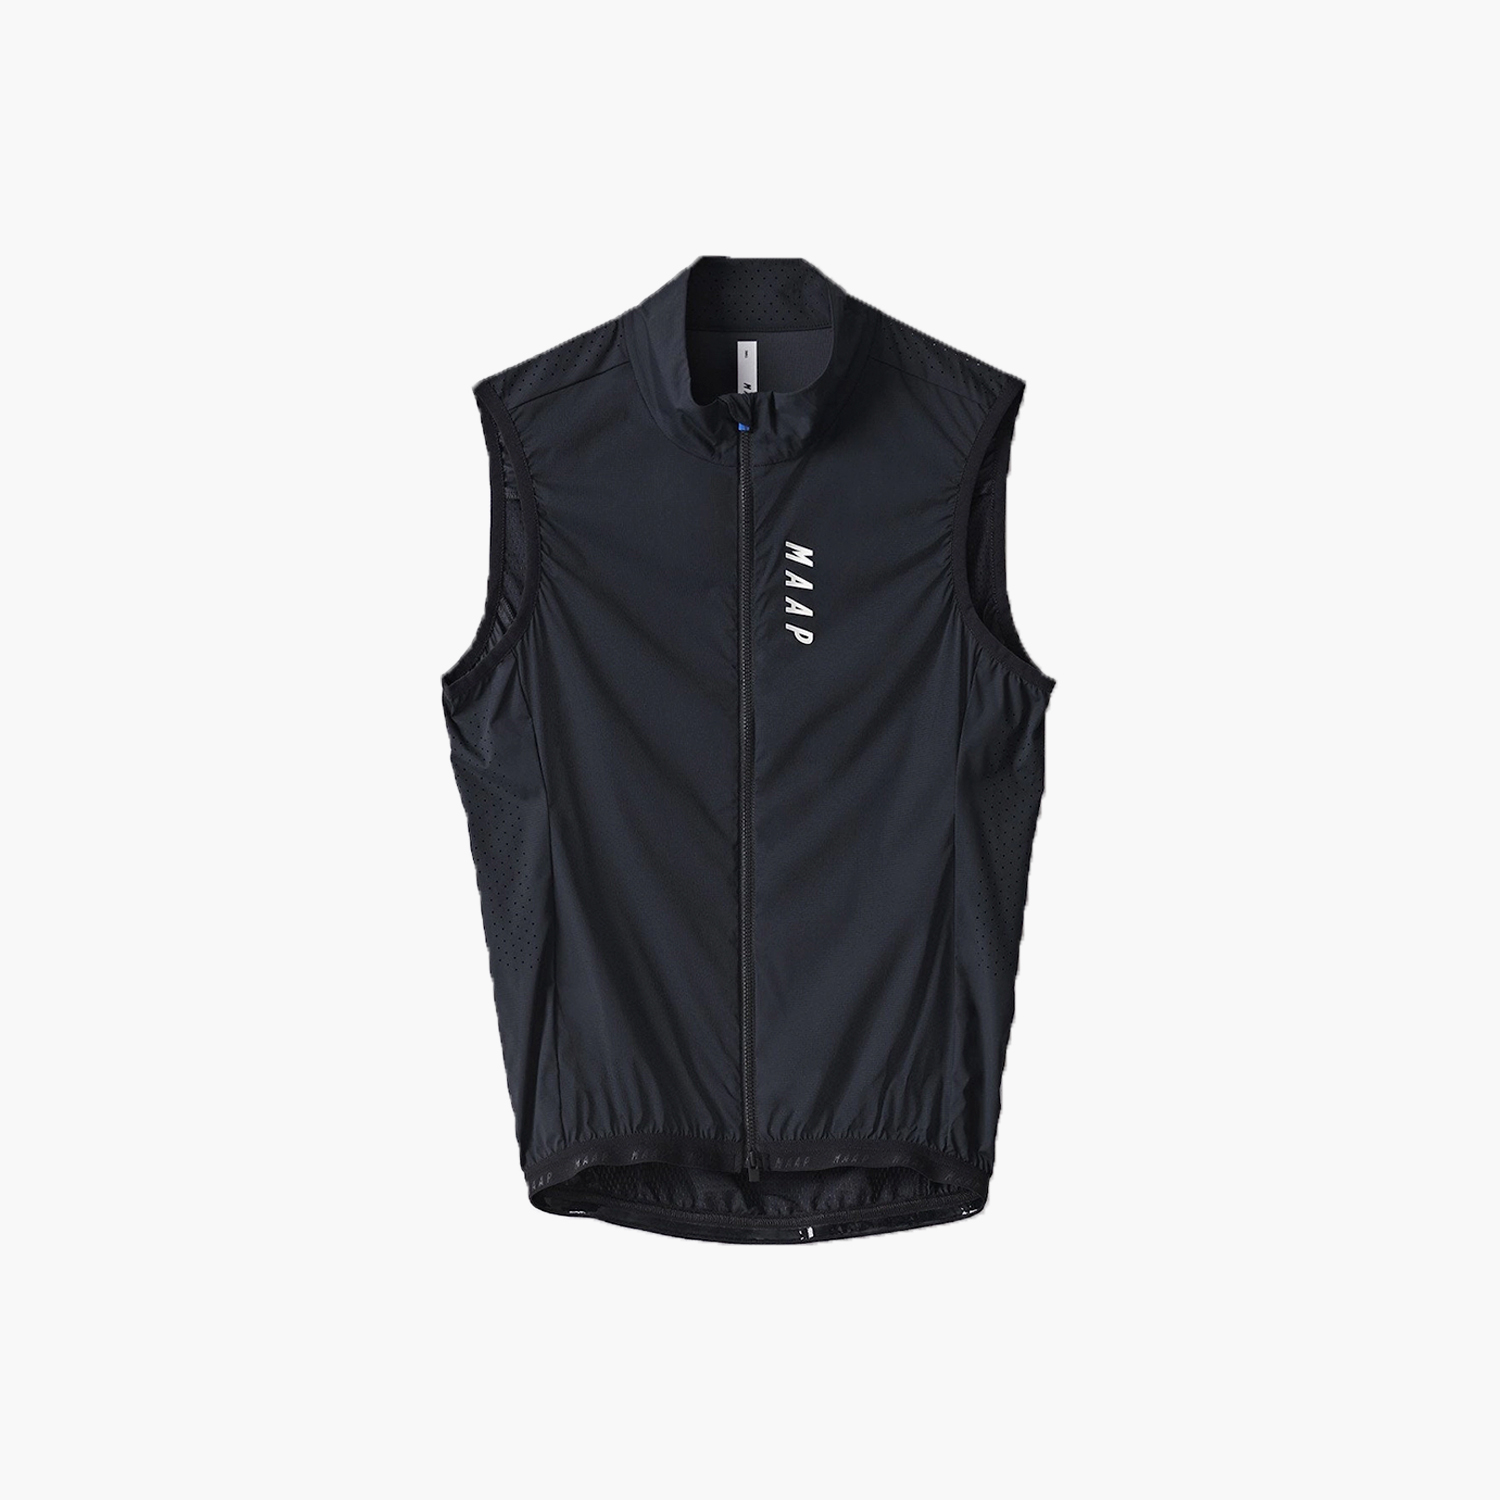 Maap Draft Team Vest - Chaleco ciclismo - Hombre